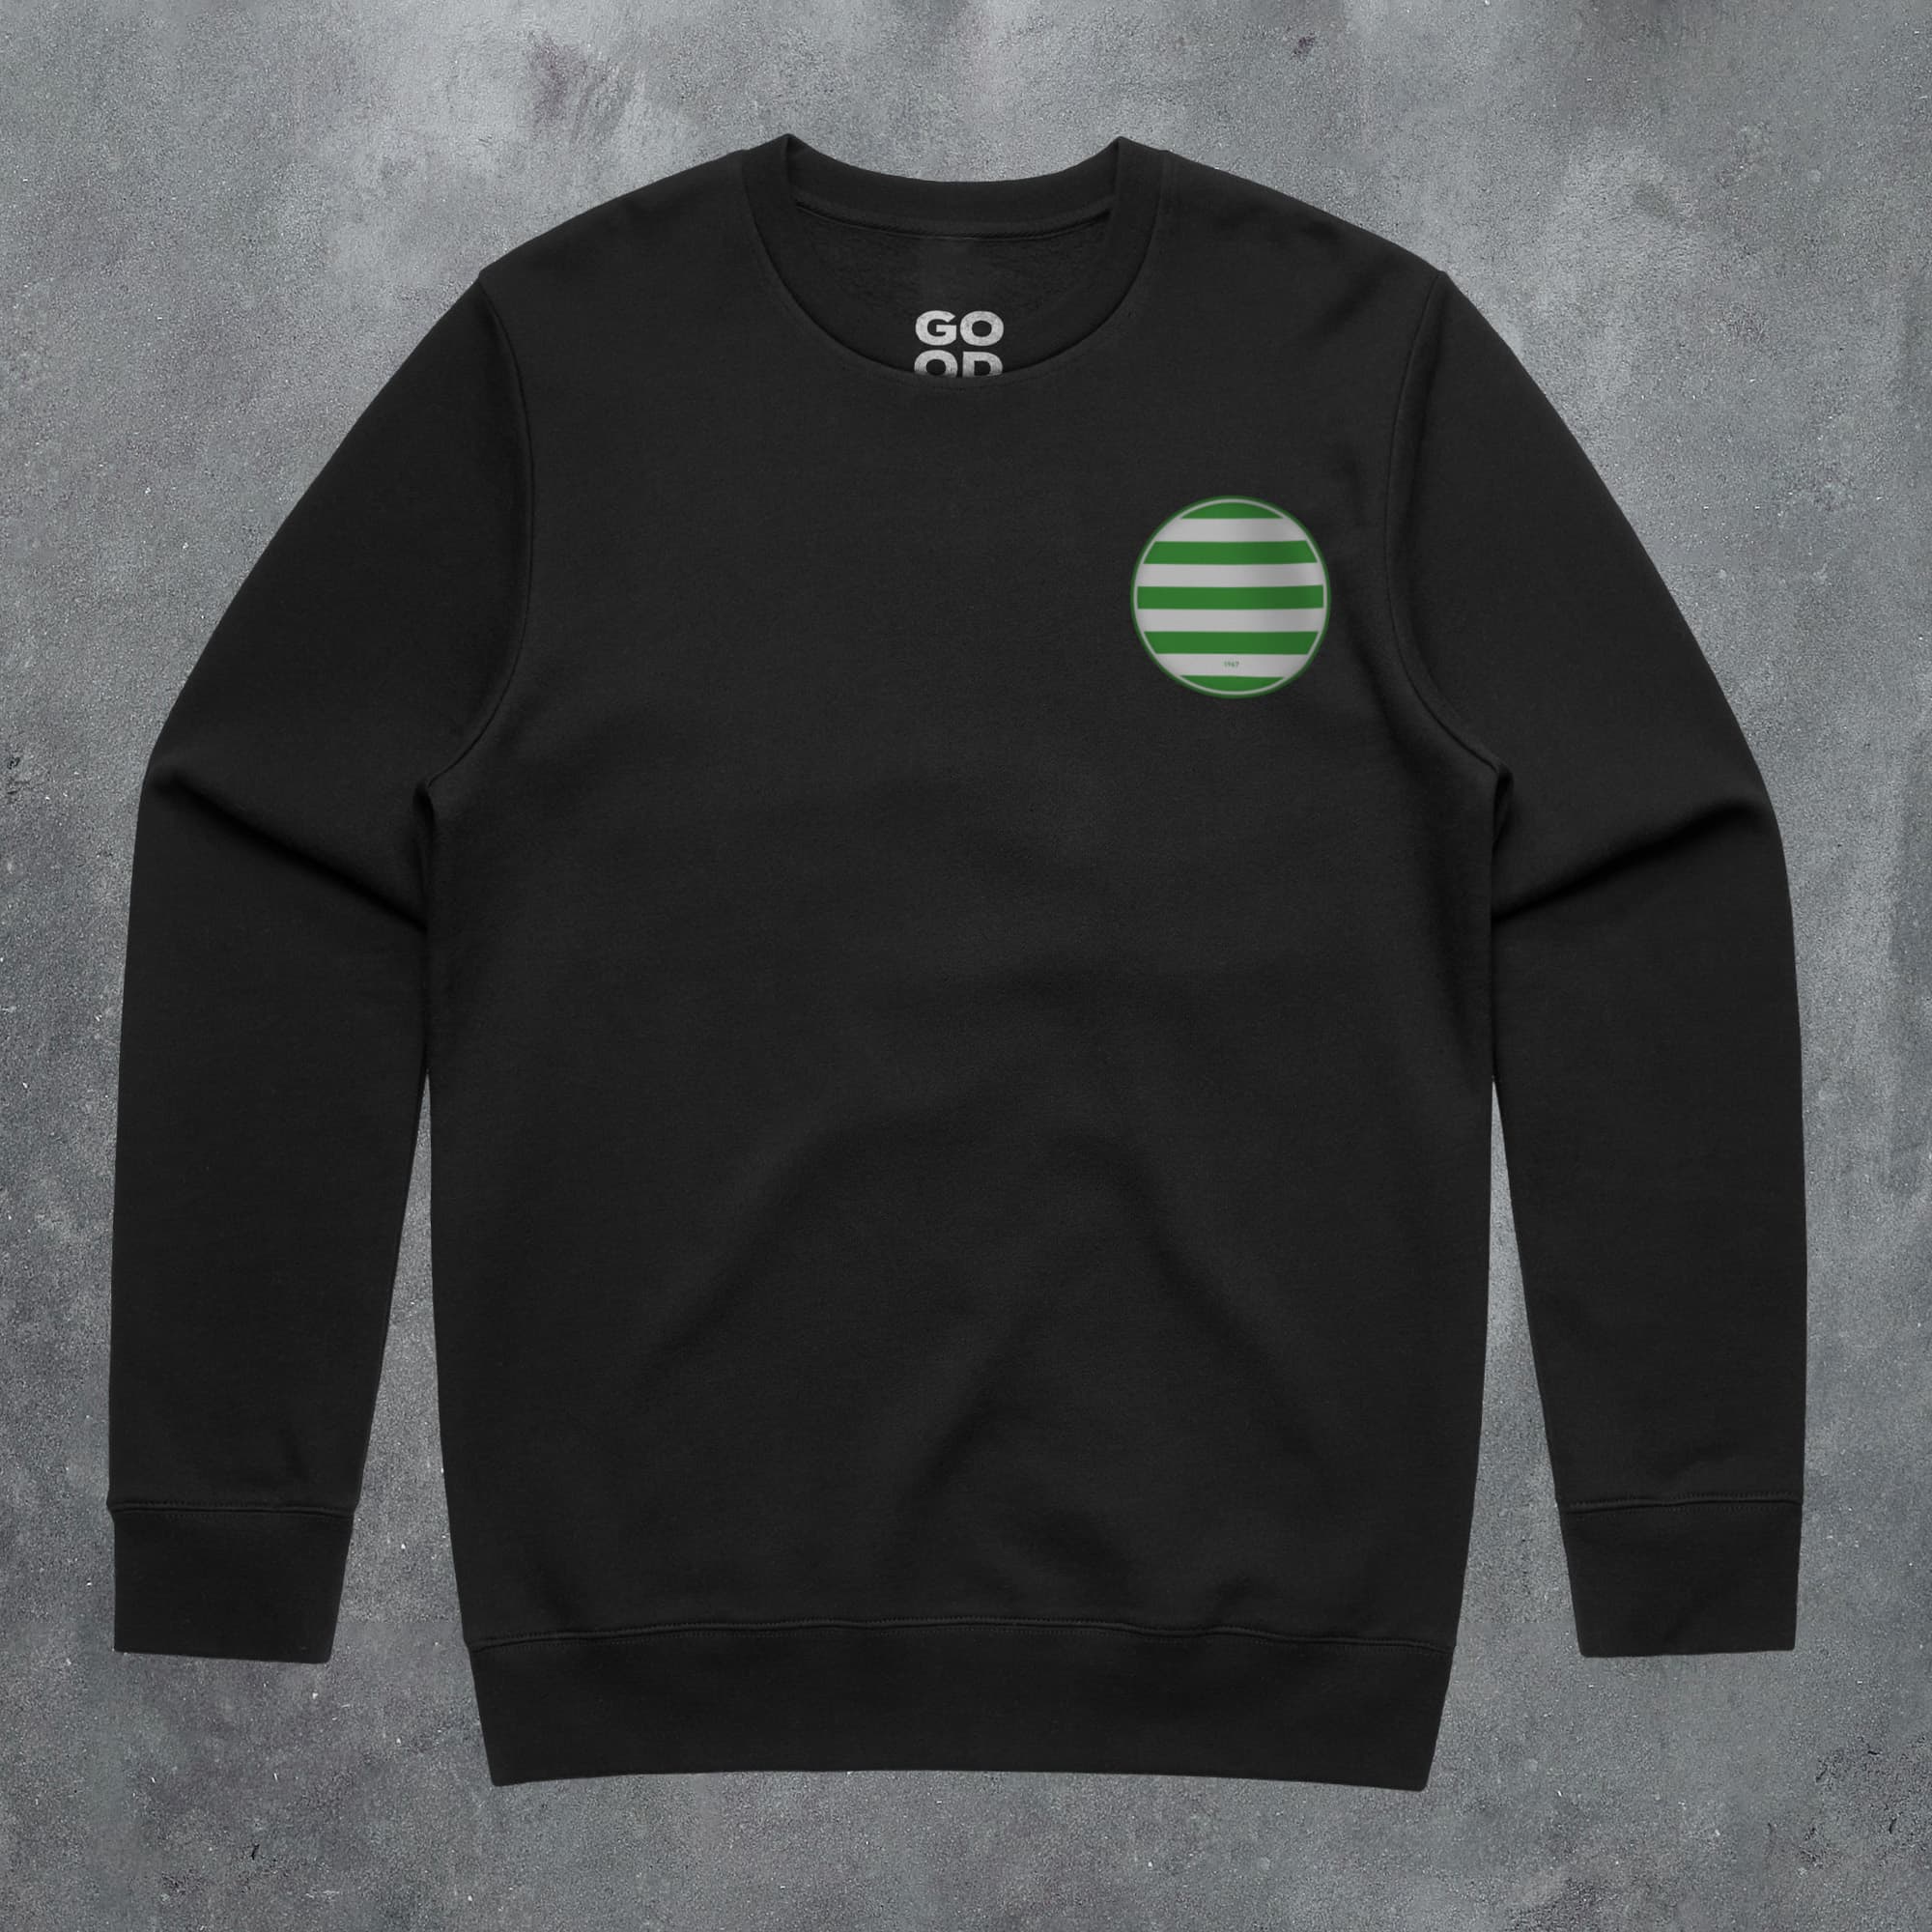 a black sweatshirt with a green circle on the front